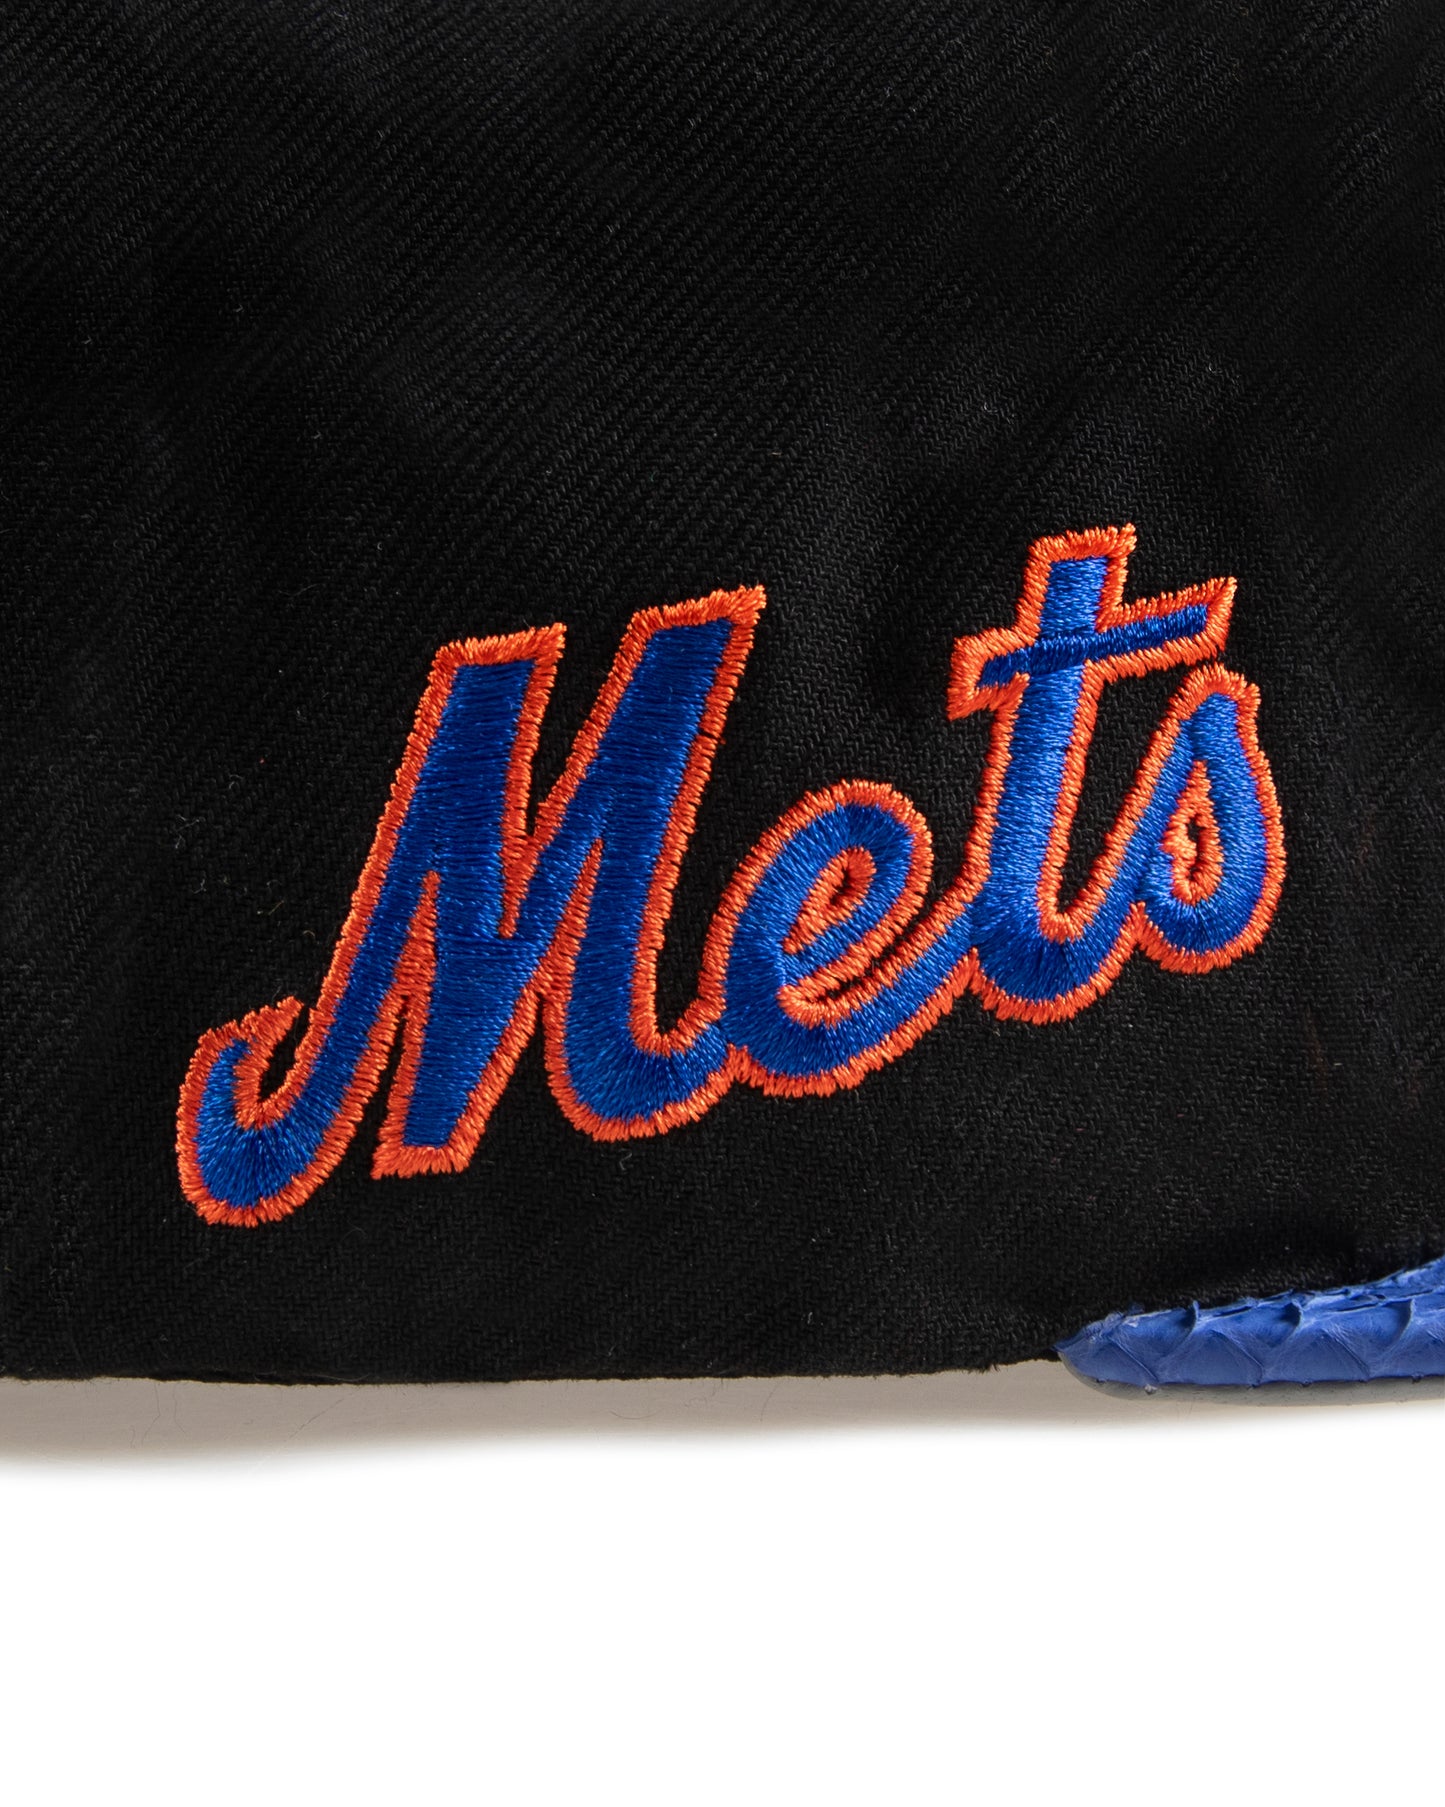 JUST DON NEW YORK METS